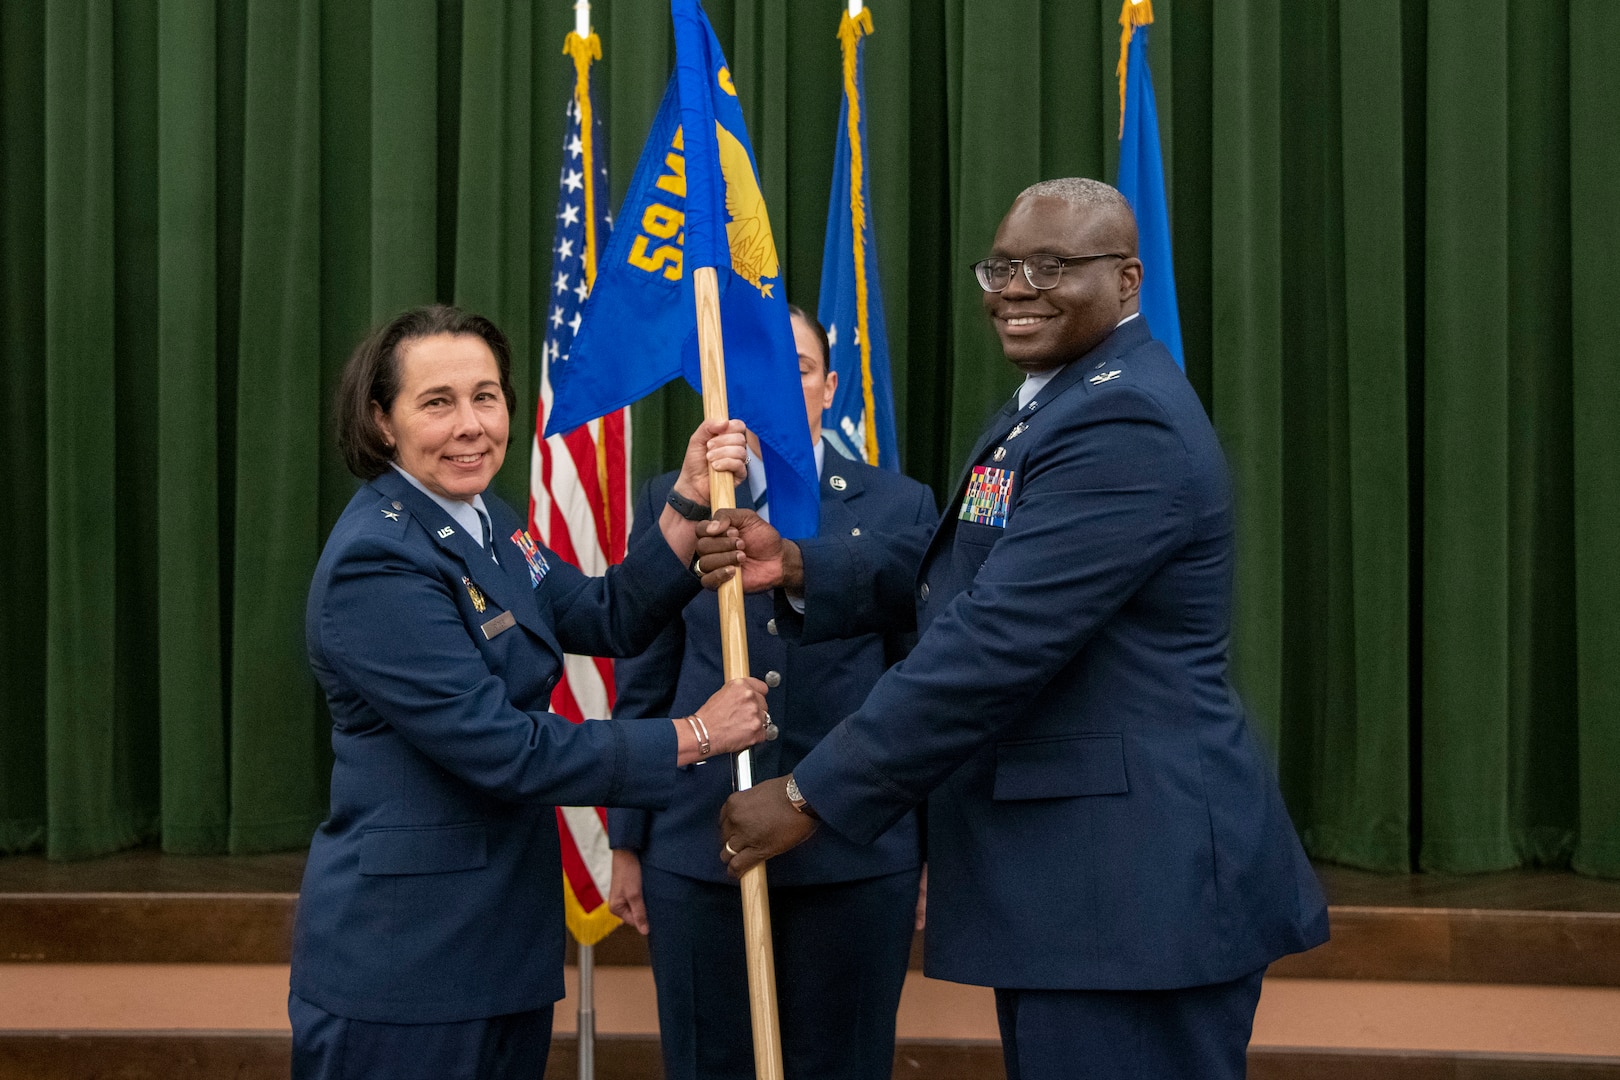 Air Force commanders pass flag in ceremony